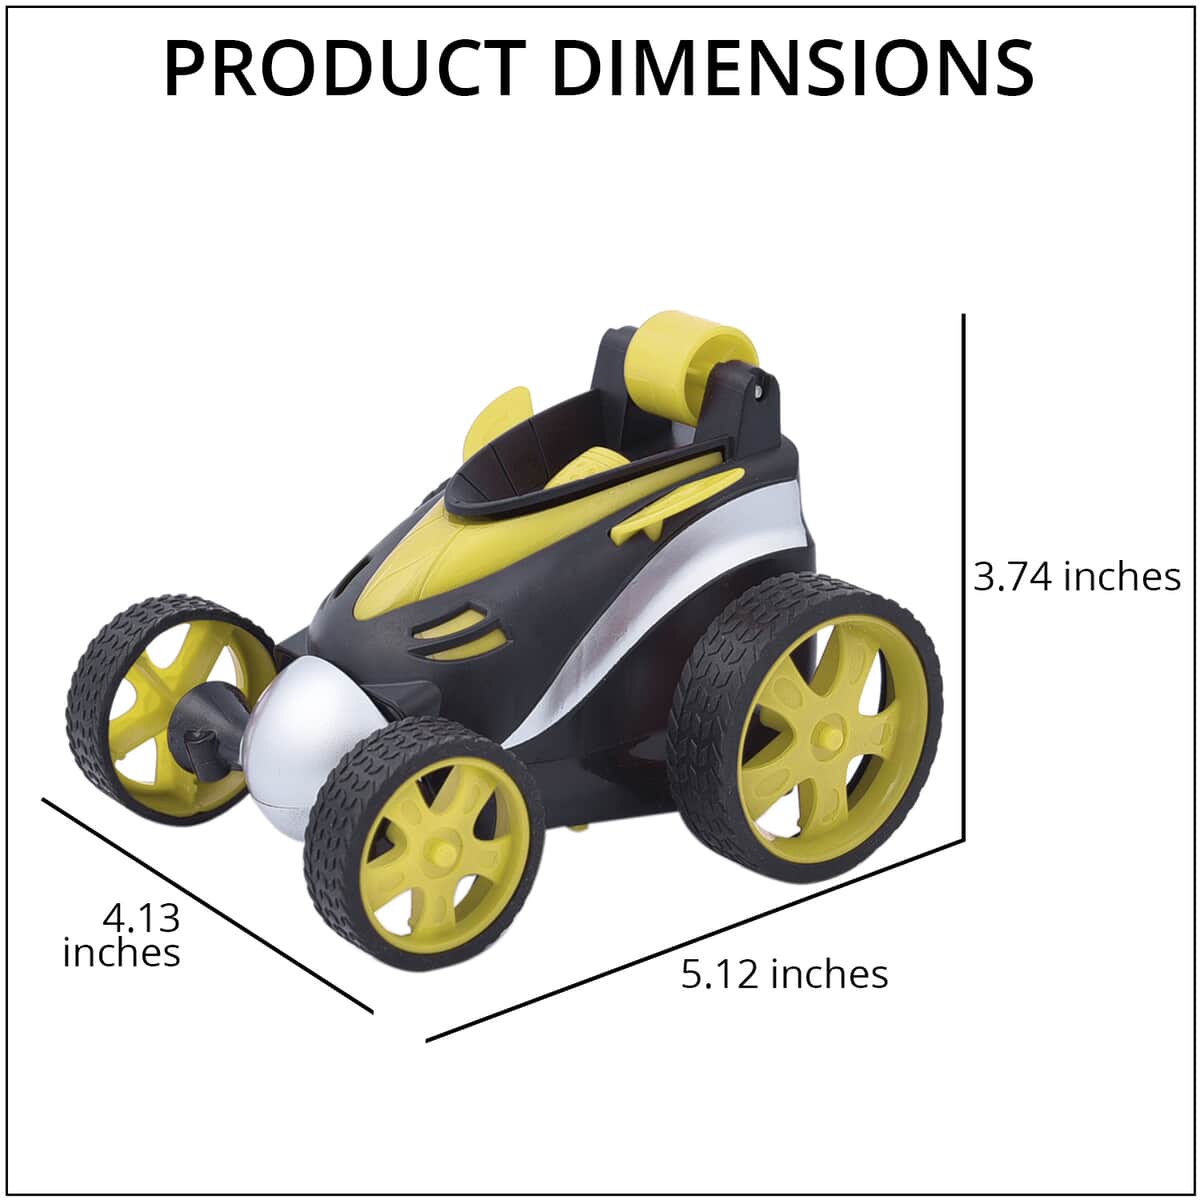 Homesmart Yellow Racing Remote Control Stunt Car, 4 Wheel Drive with 360 Degree Rotation, Spin and Flips (AA Batteries Not Included) image number 3